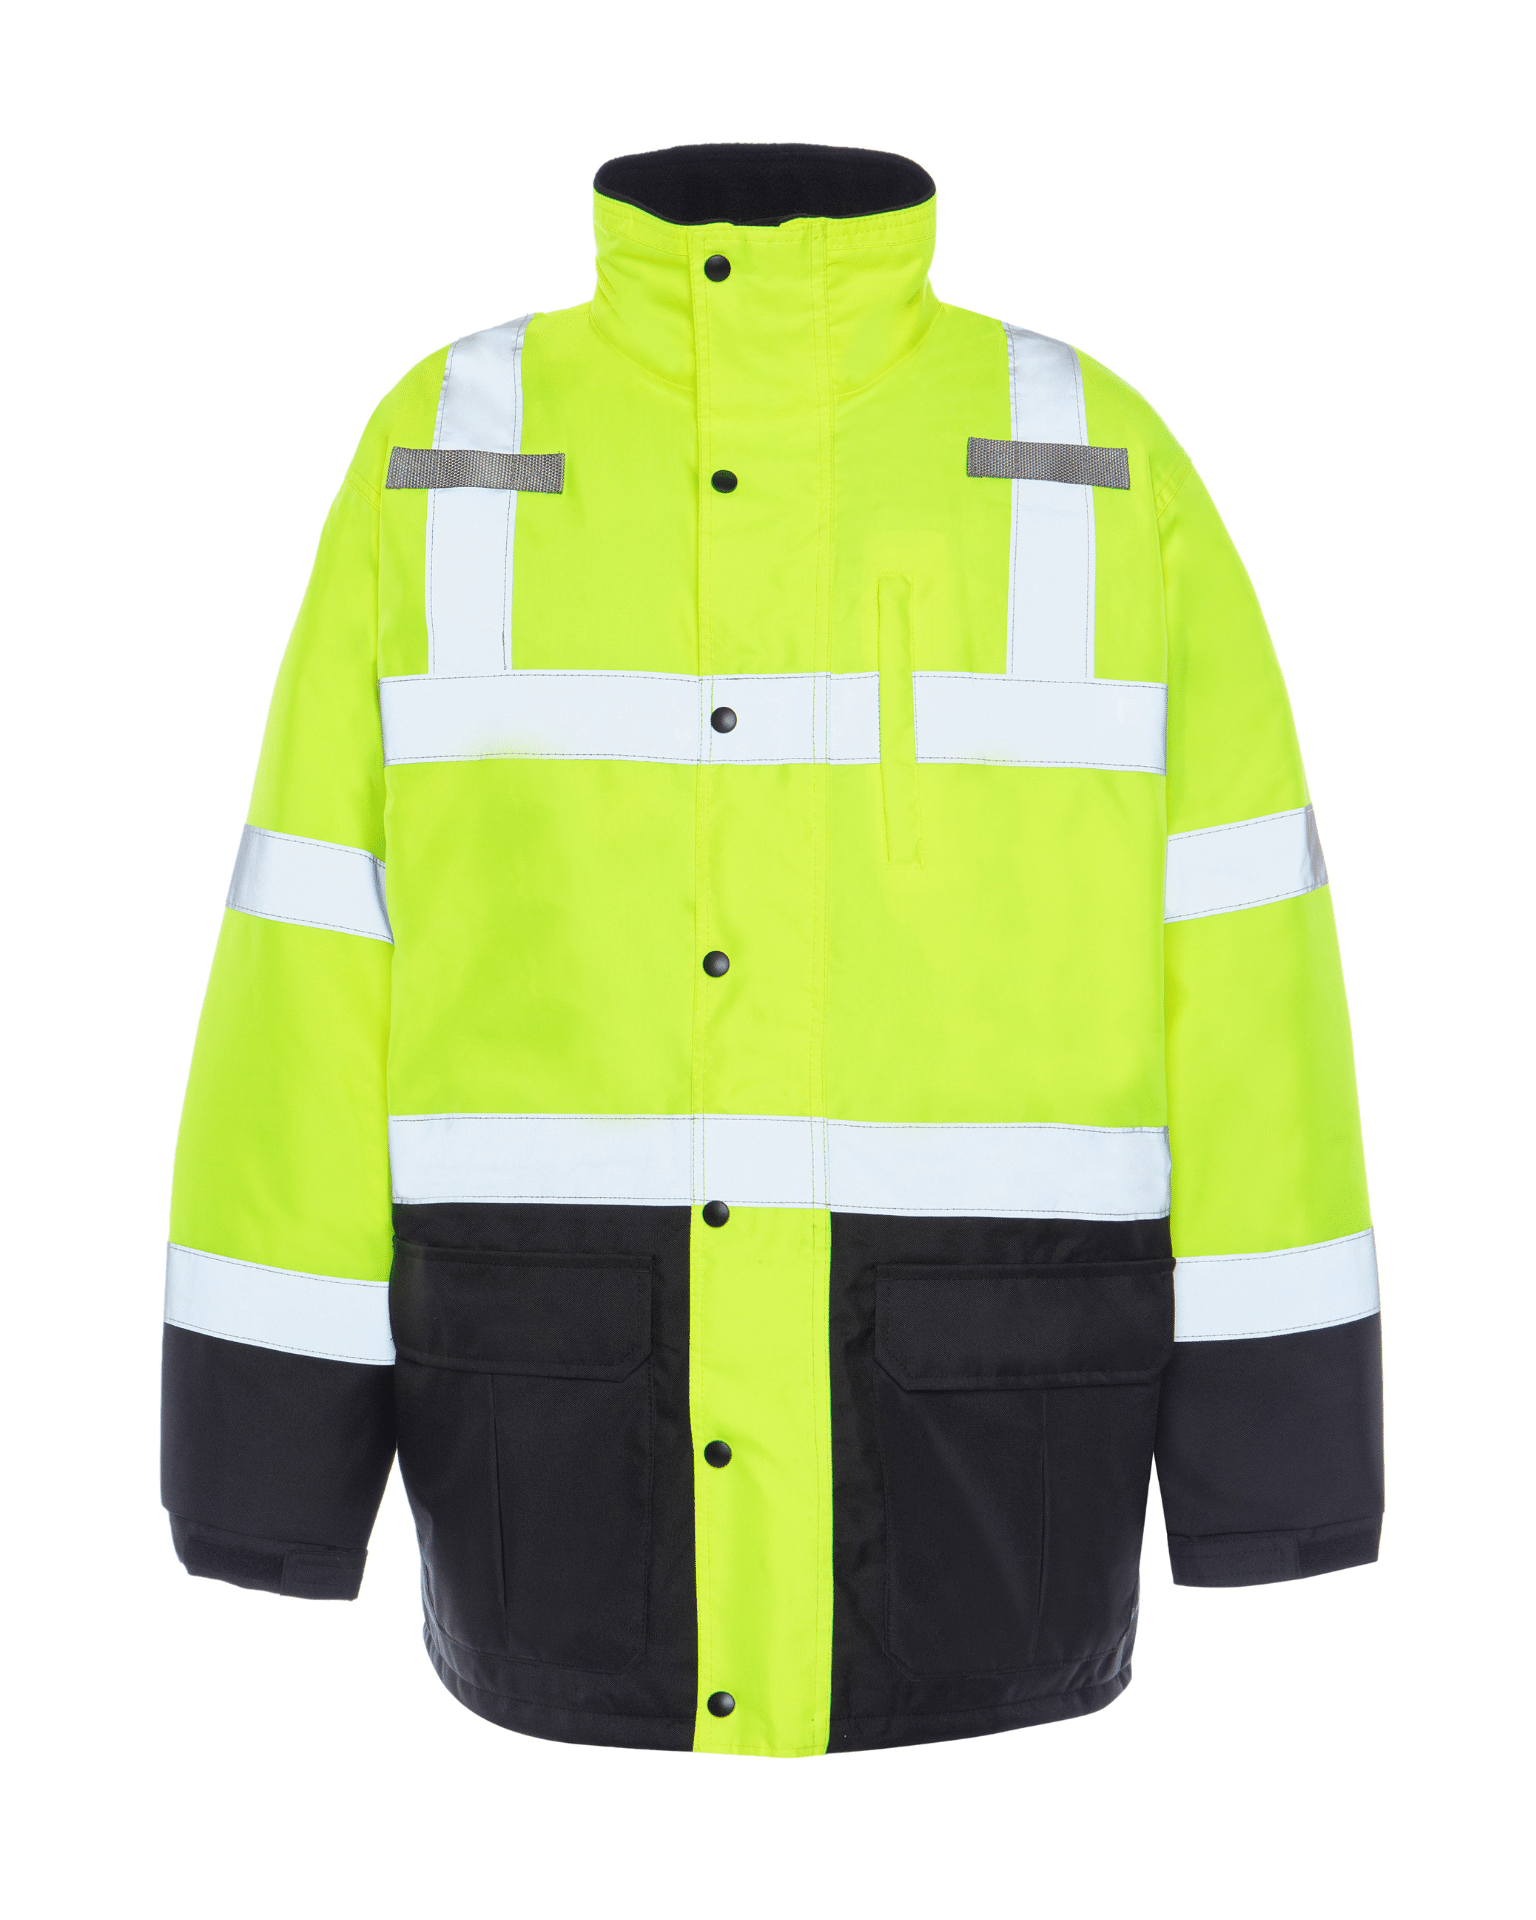 ANSI Class 3 High Visibility Contractor Jacket for men by Utility Pro